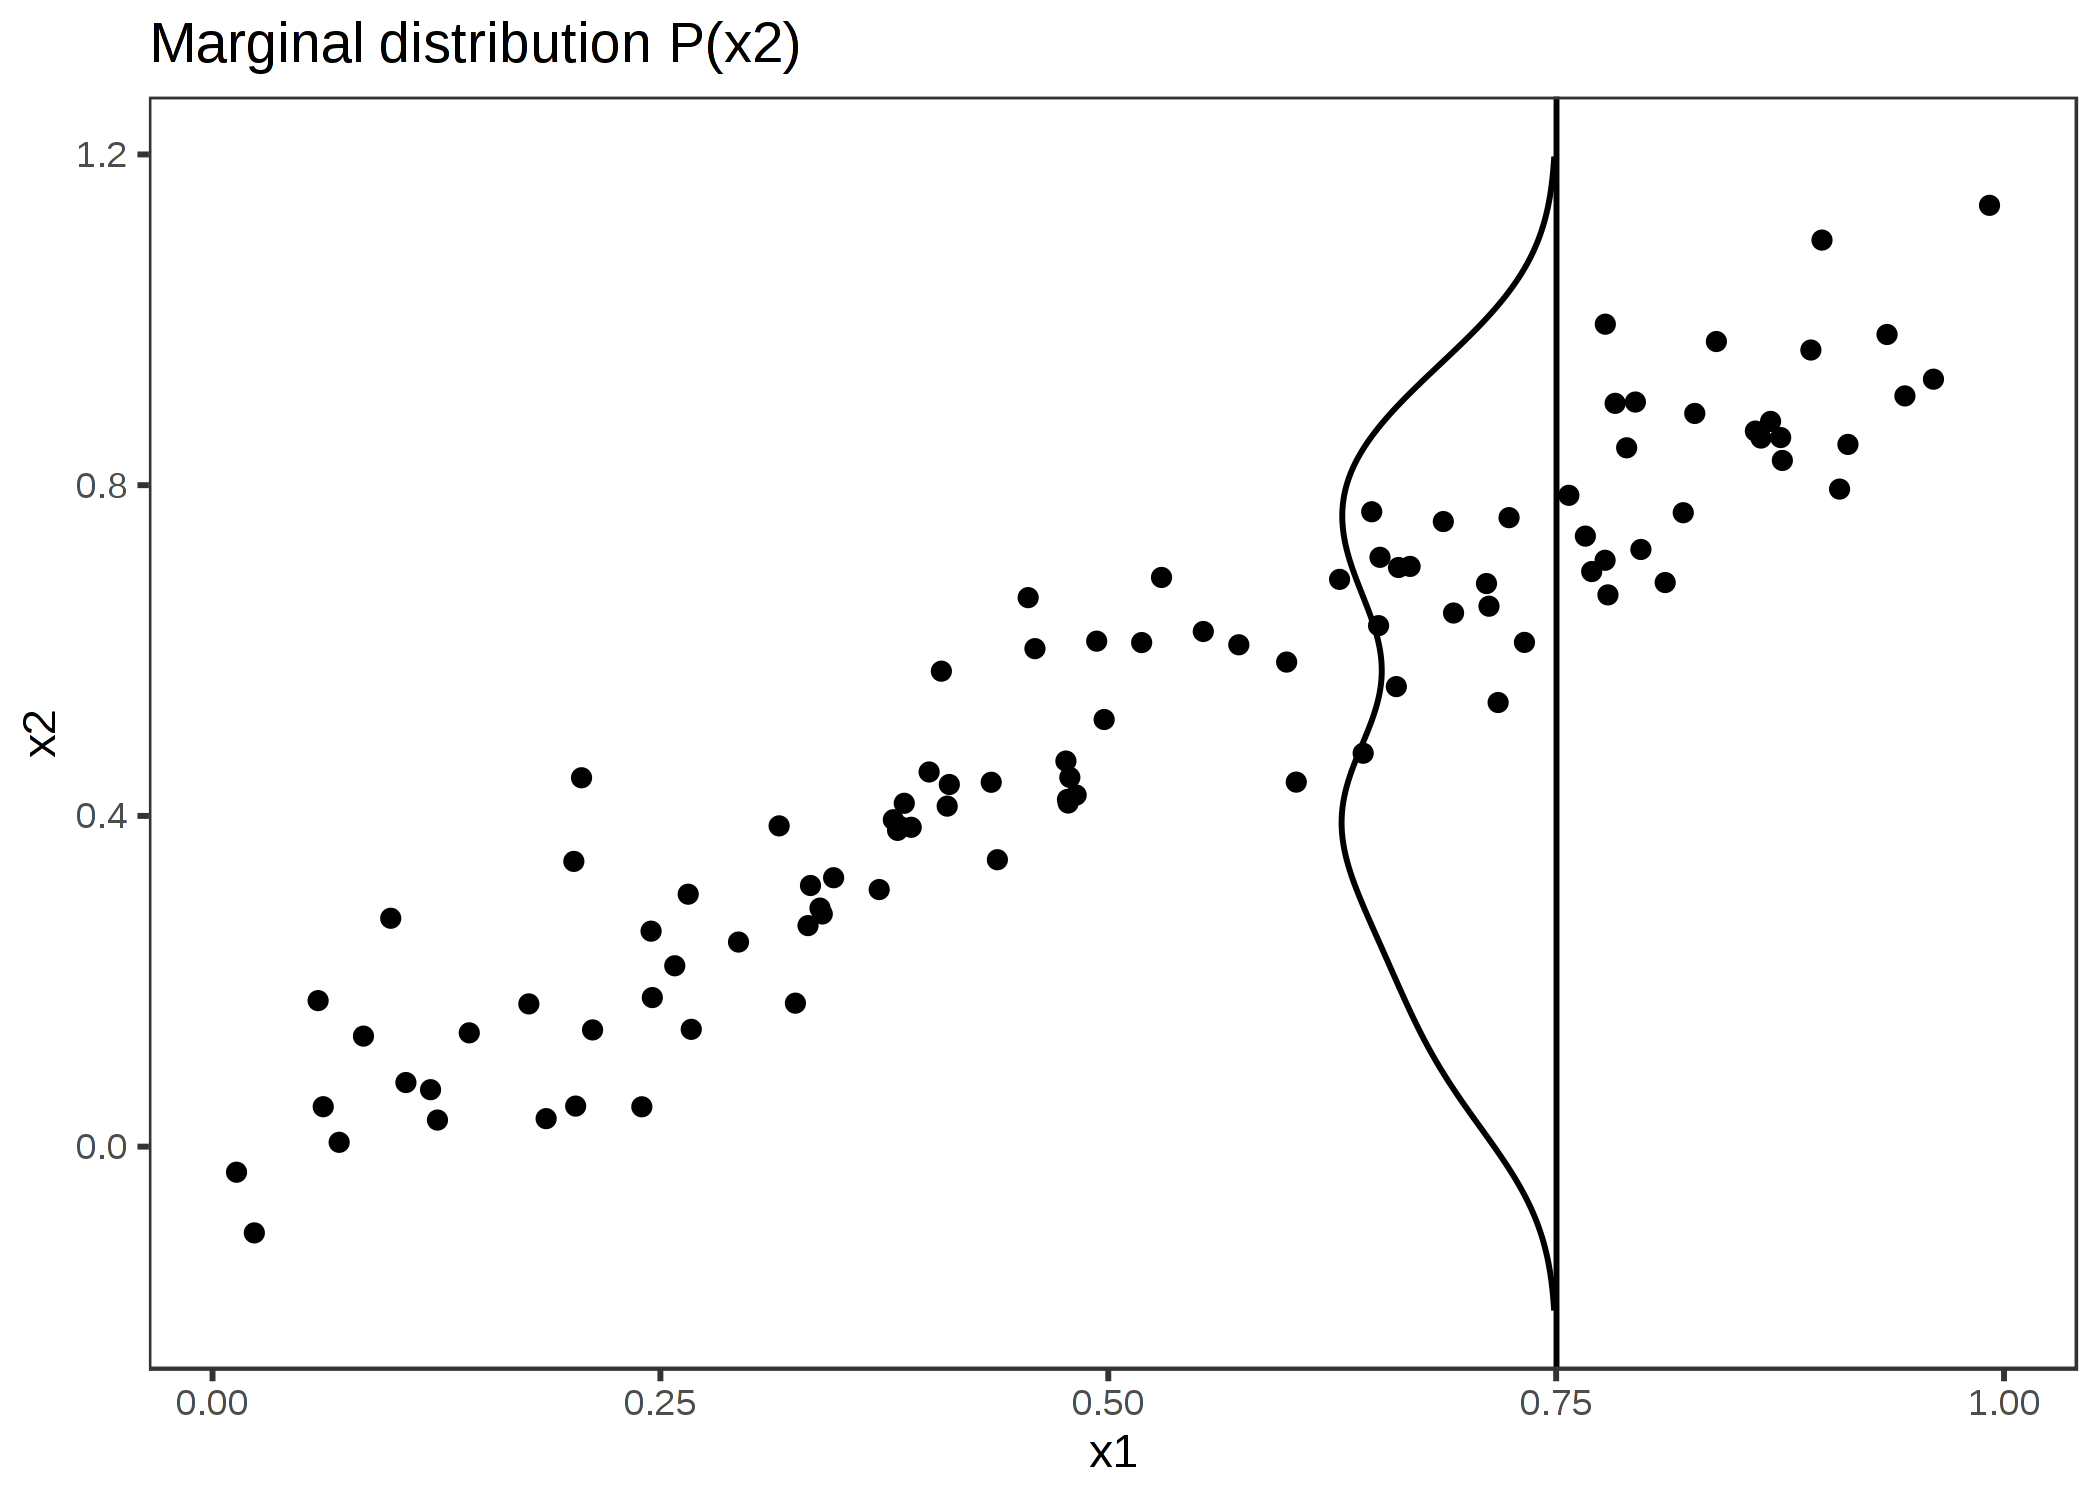 Strongly correlated features x1 and x2. To calculate the feature effect of x1 at 0.75, the PDP replaces x1 of all instances with 0.75, falsely assuming that the distribution of x2 at x1 = 0.75 is the same as the marginal distribution of x2 (vertical line). This results in unlikely combinations of x1 and x2 (e.g. x2=0.2 at x1=0.75), which the PDP uses for the calculation of the average effect.